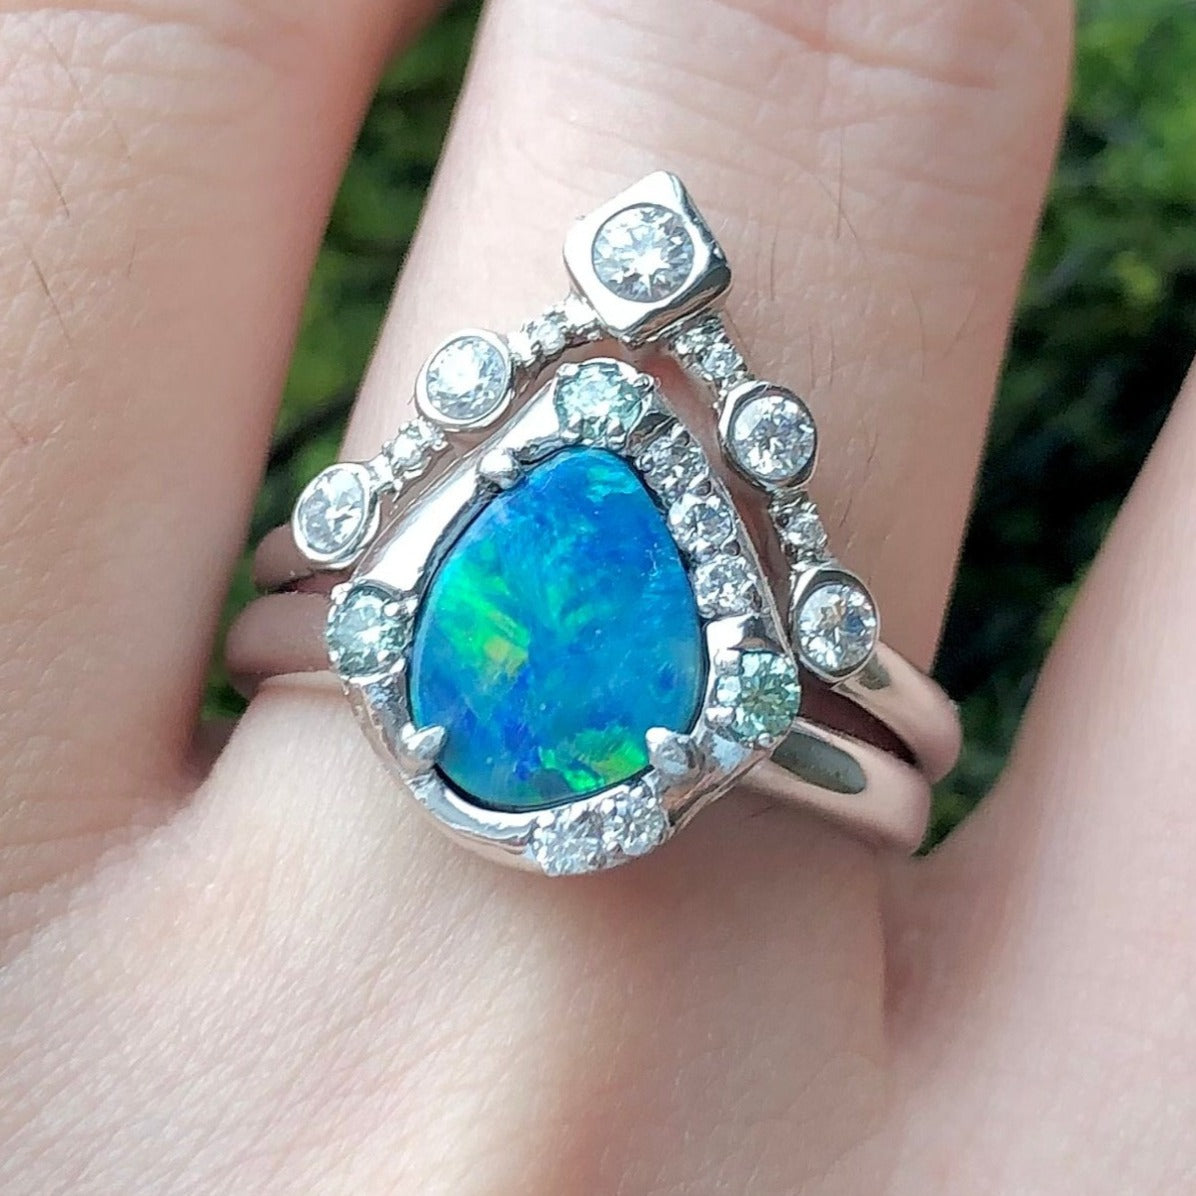 The Midnight Deep Blue Opal Wedding Rings - Size US6.5